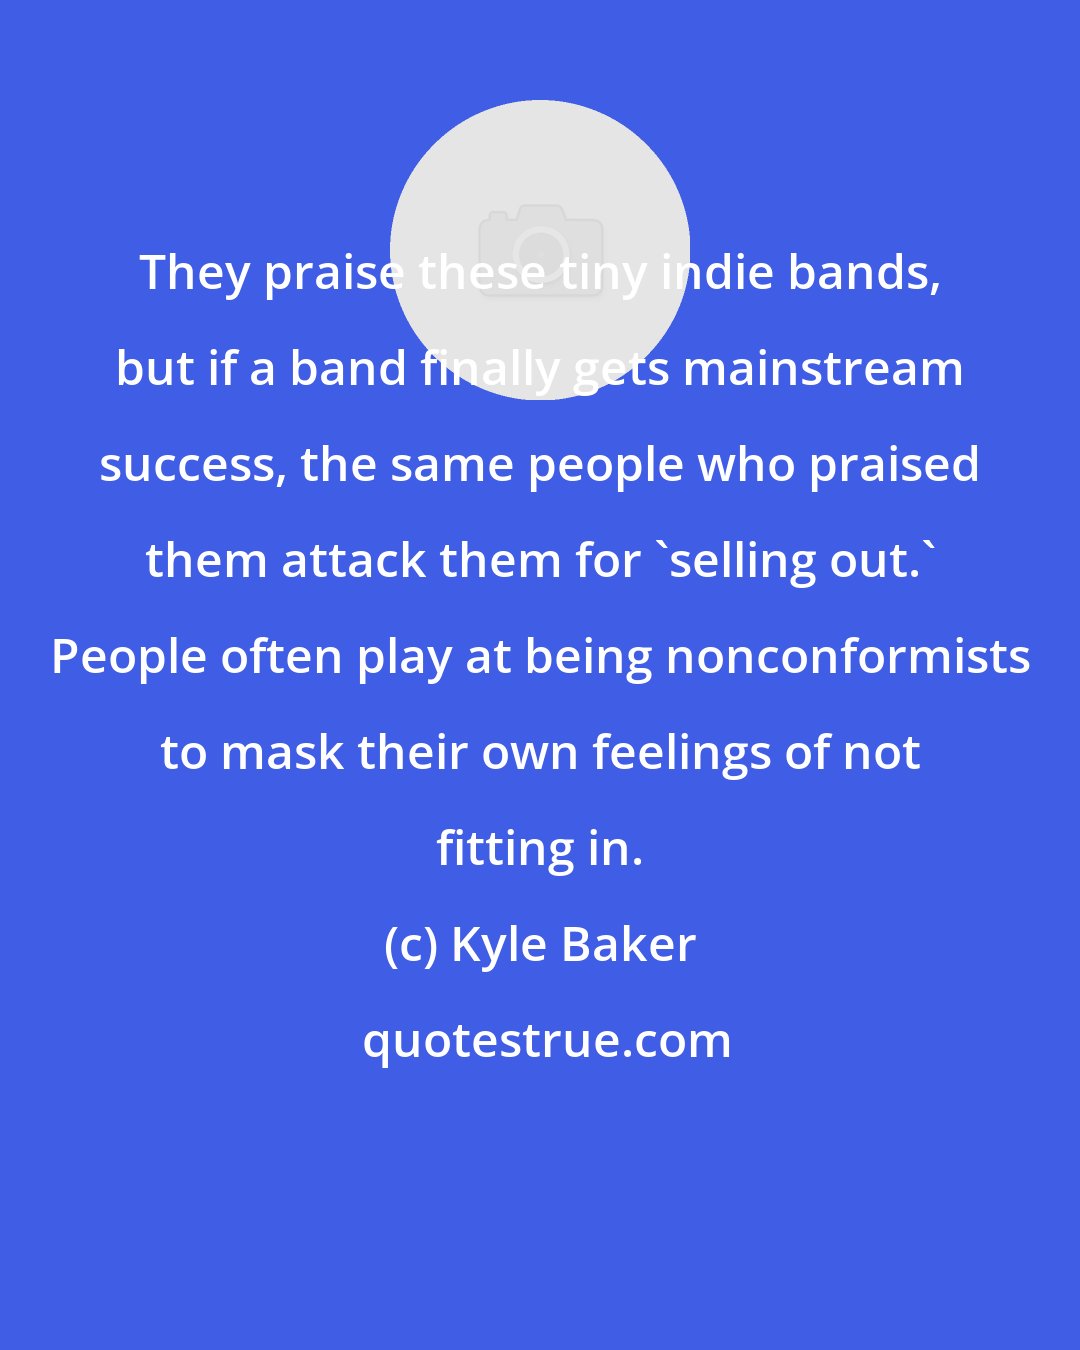 Kyle Baker: They praise these tiny indie bands, but if a band finally gets mainstream success, the same people who praised them attack them for 'selling out.' People often play at being nonconformists to mask their own feelings of not fitting in.